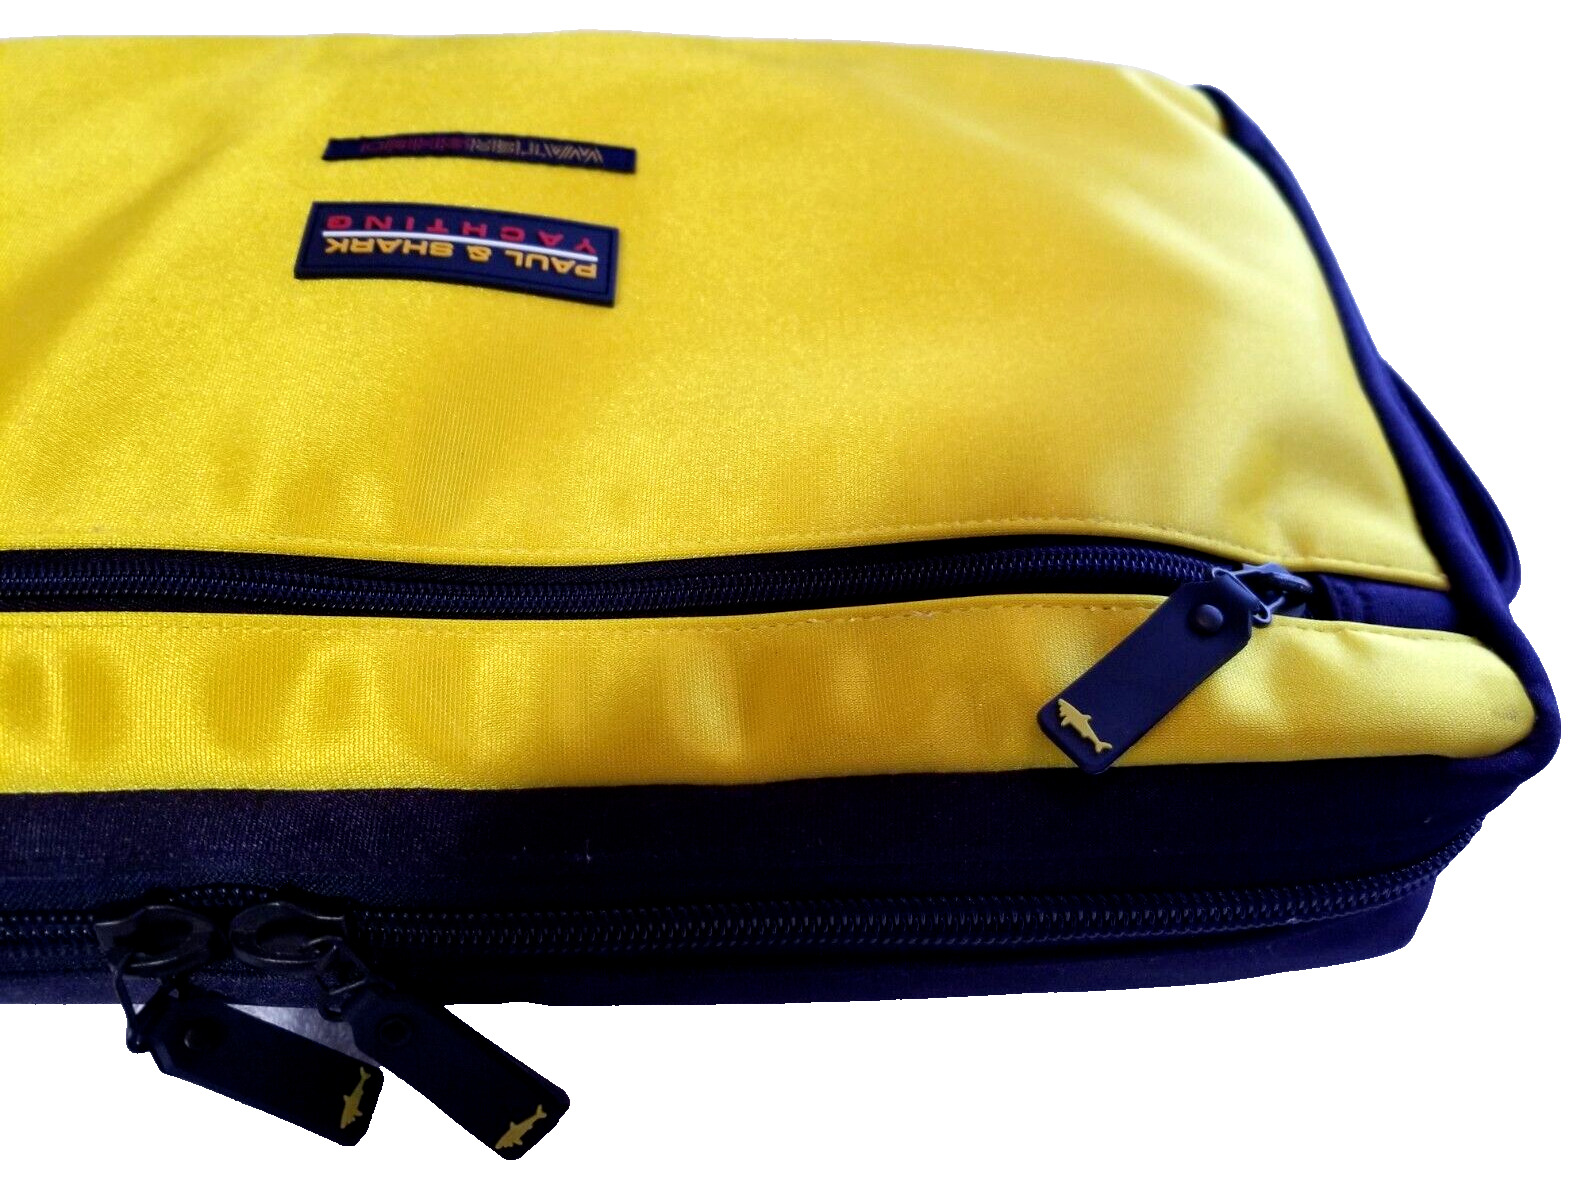 PAUL & SHARK YACHTING FINE RED YELLOW Blue USED LAPTOP BAG LARGE SOFT CASE ITALY